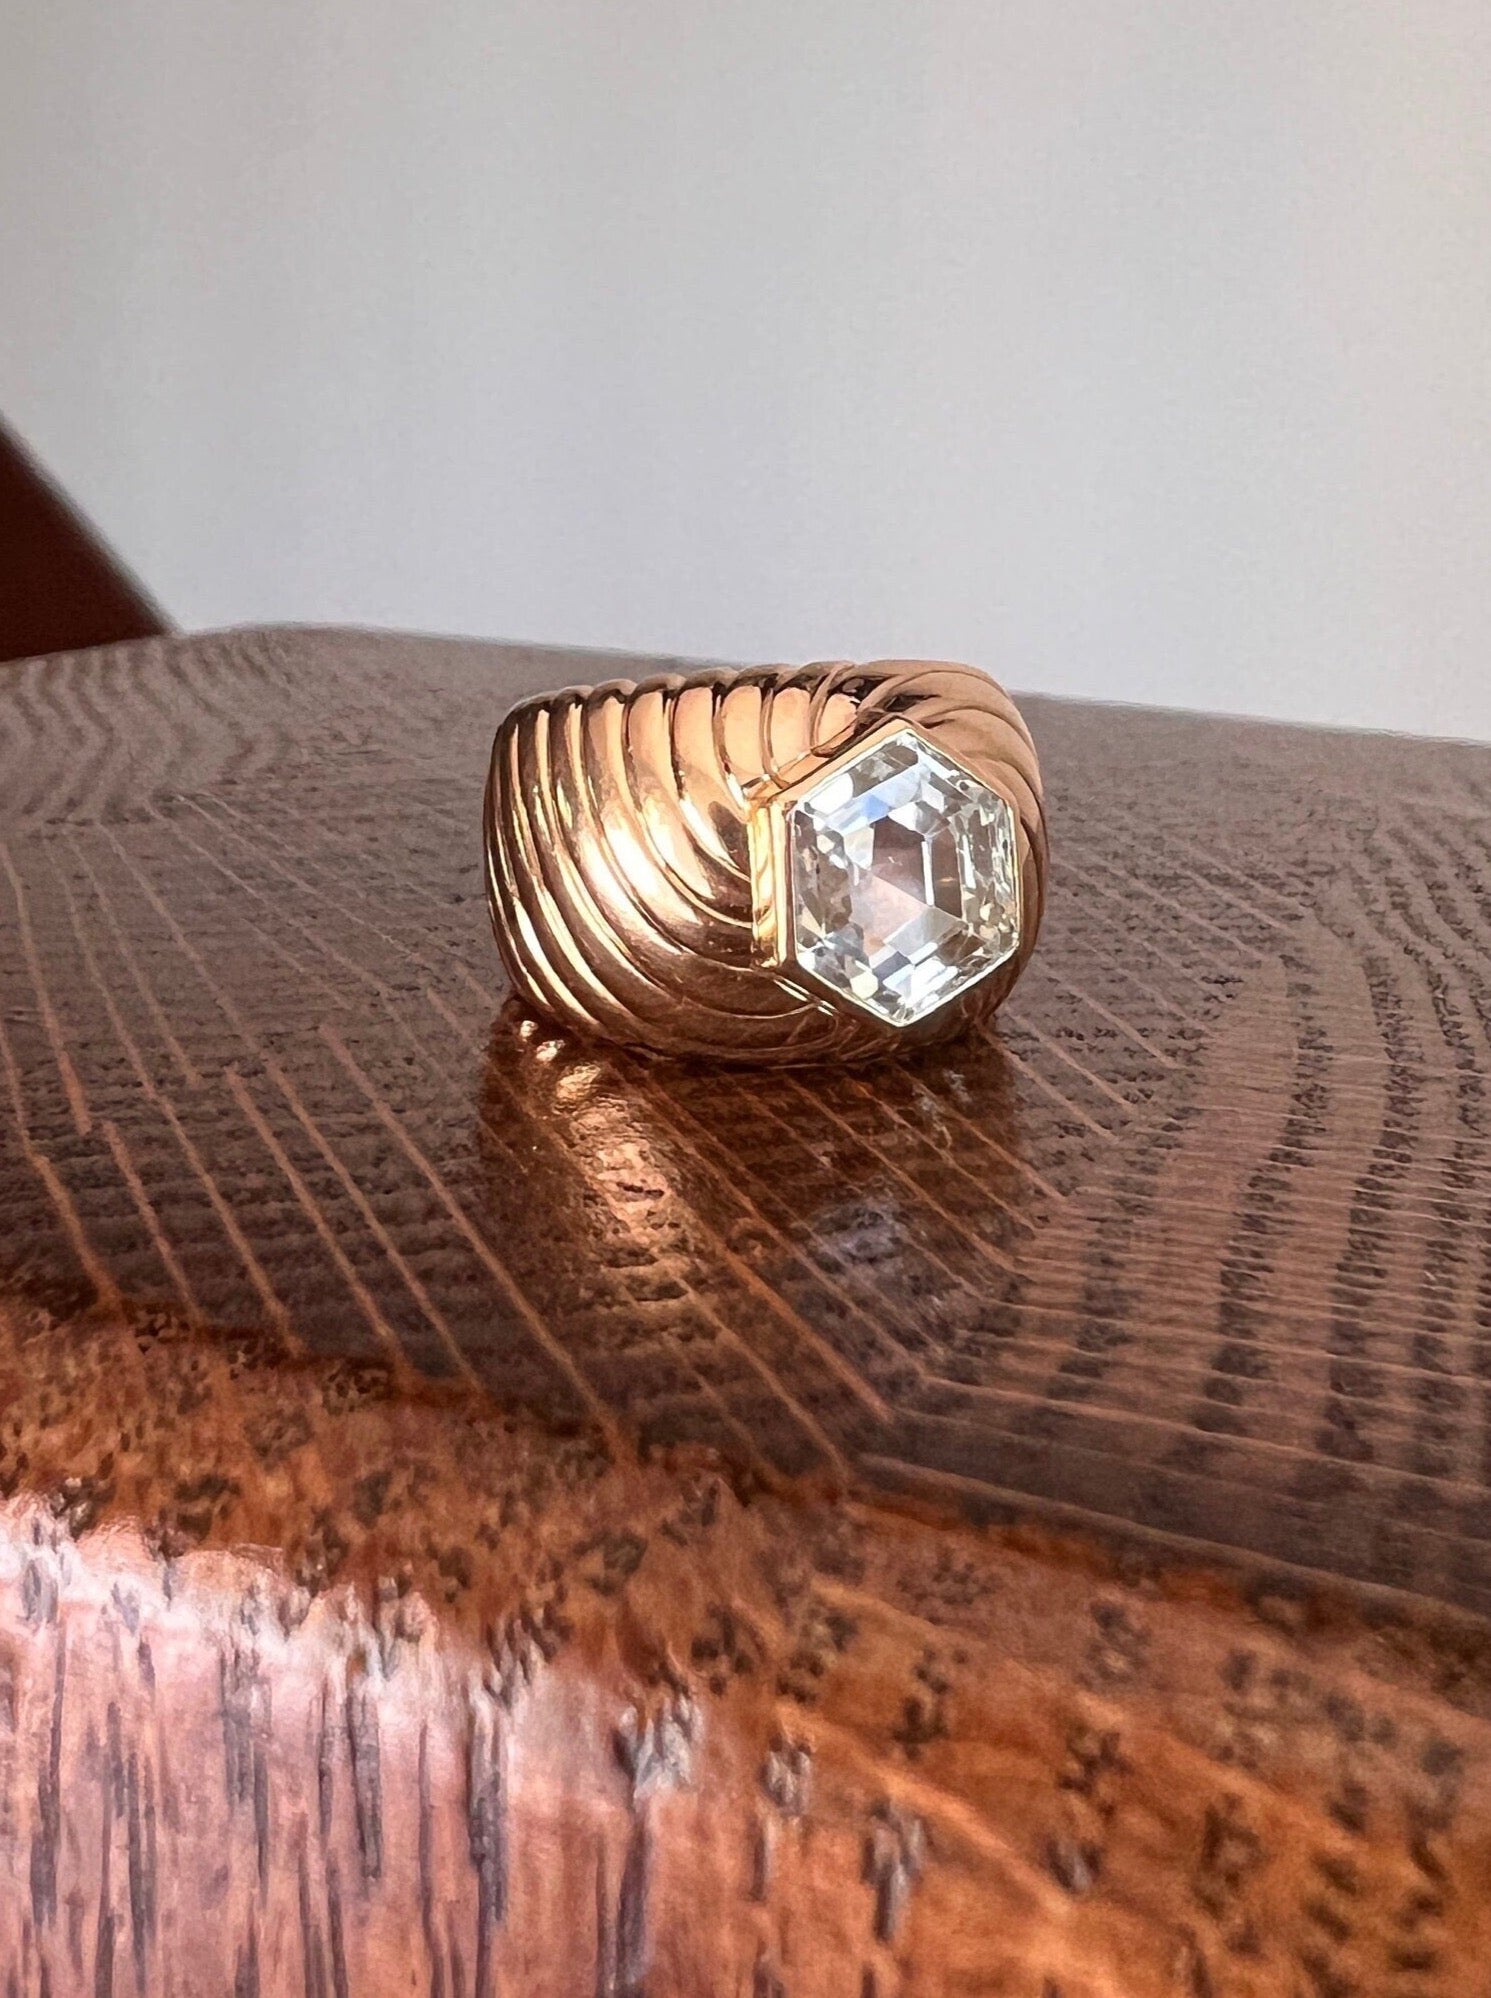 Mega HEAVY White Sapphire HEXAGON Gadroon Ring 19g 18k Gold French Vintage Chunky 13mm Wide Band Stacker Swirled Lined Geometric Domed Gift